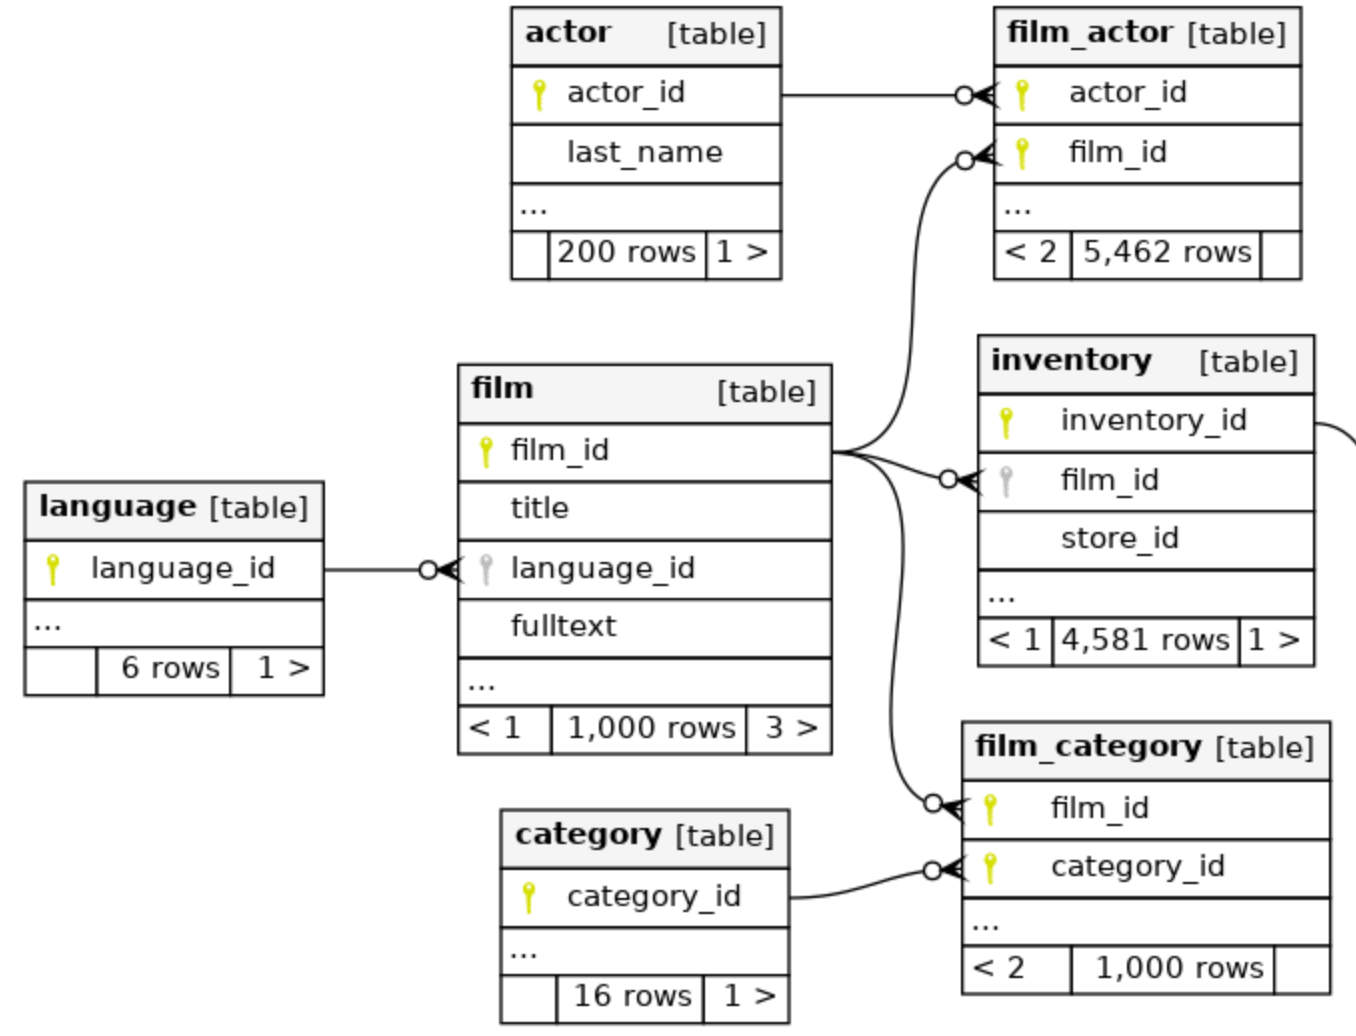 Spring Data JPA - EntityManager - Films table